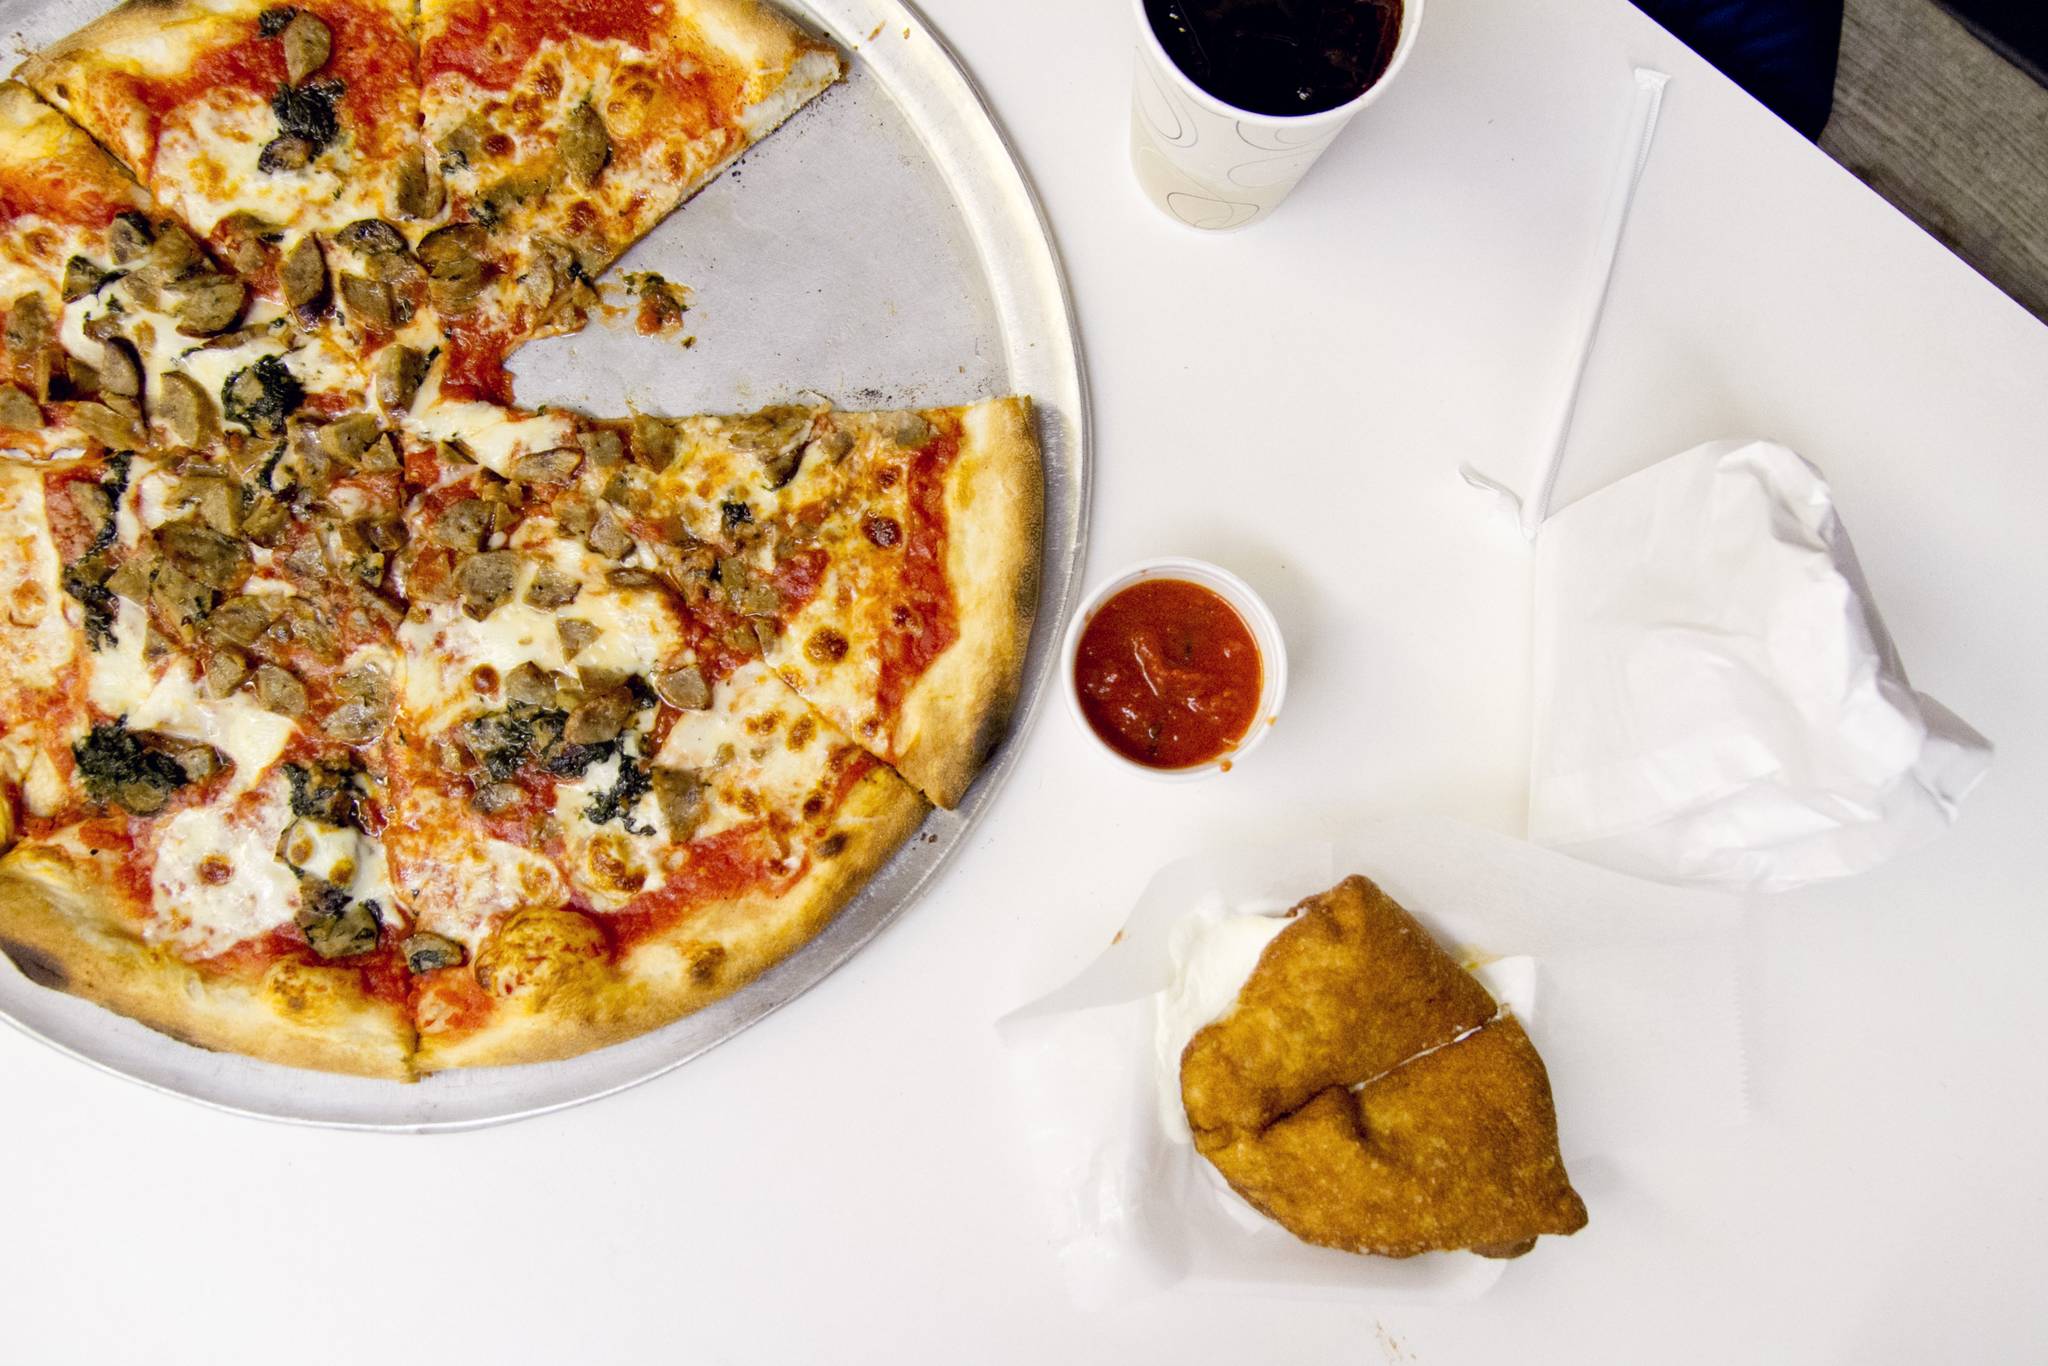 Pizza benefits from health food trend